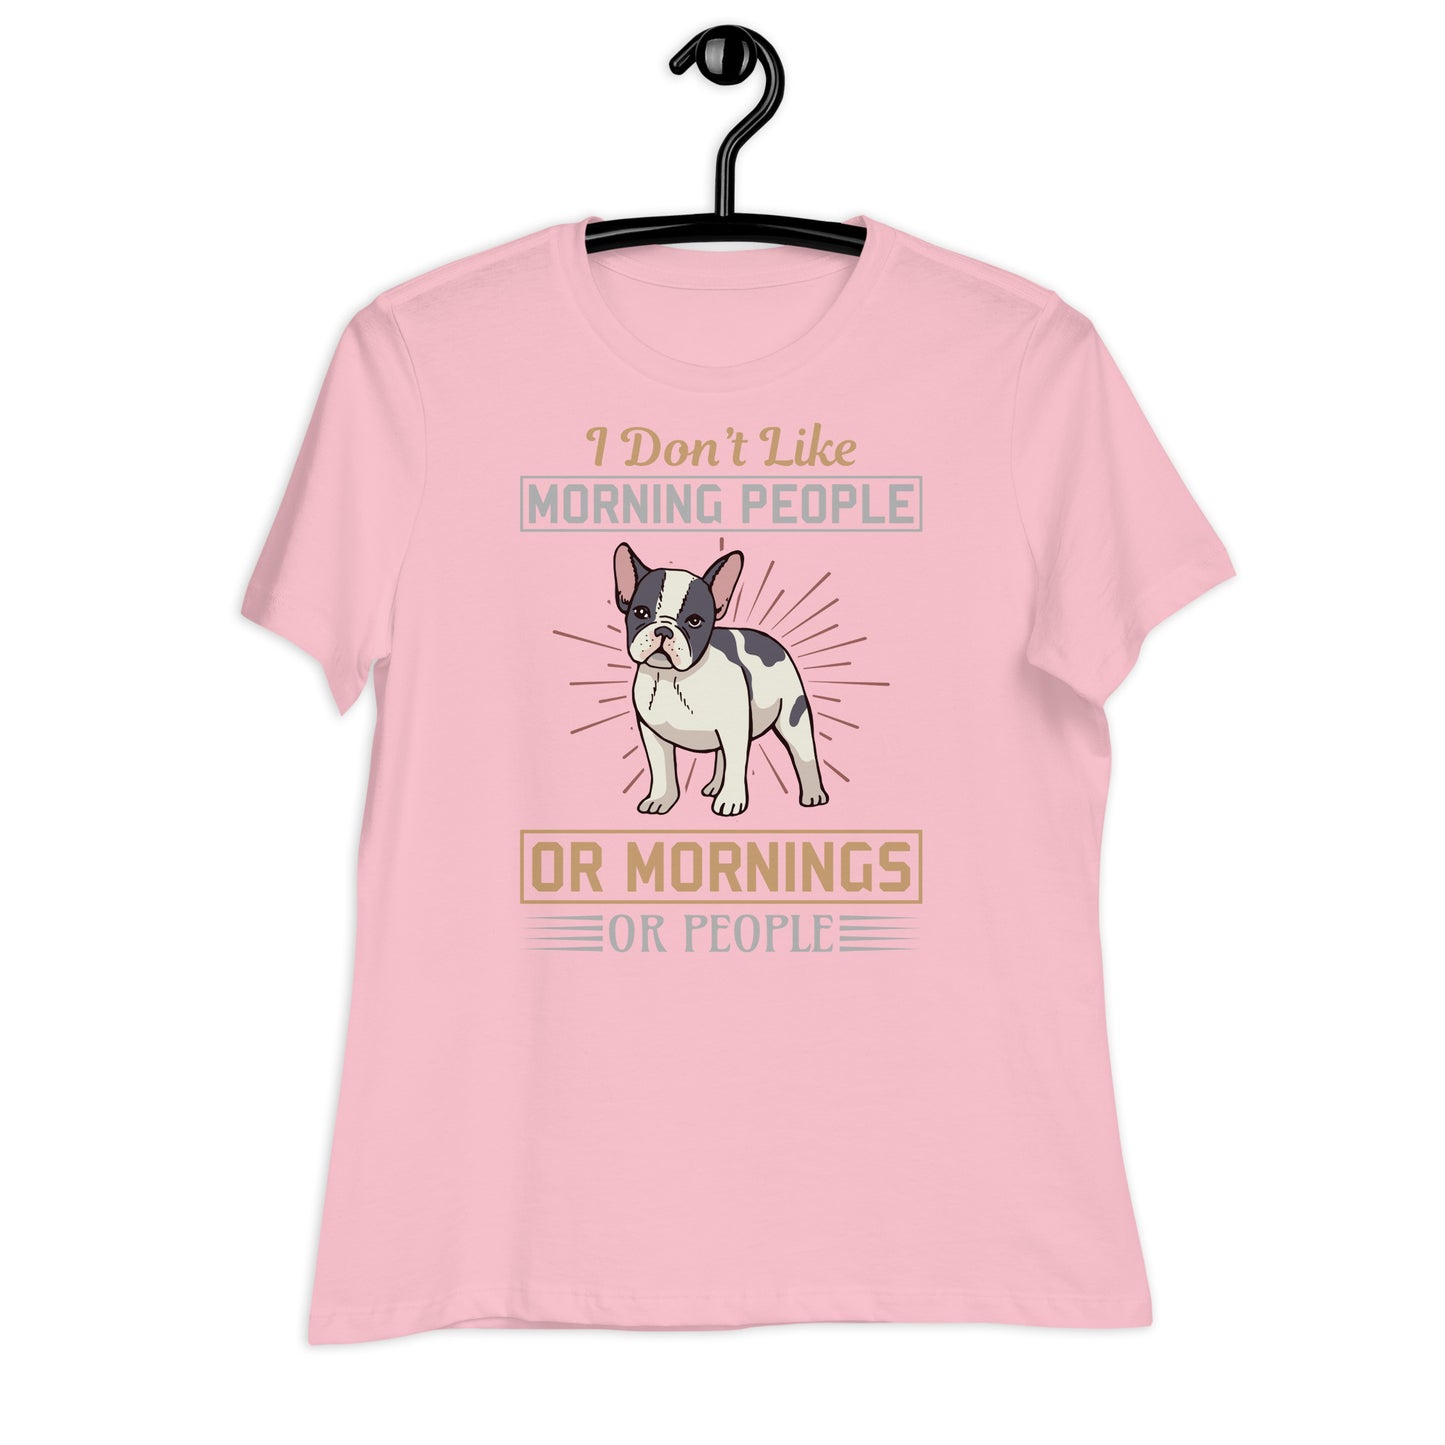 Women's Relaxed T-Shirt I DON'T LIKE MORNING PEOPLE